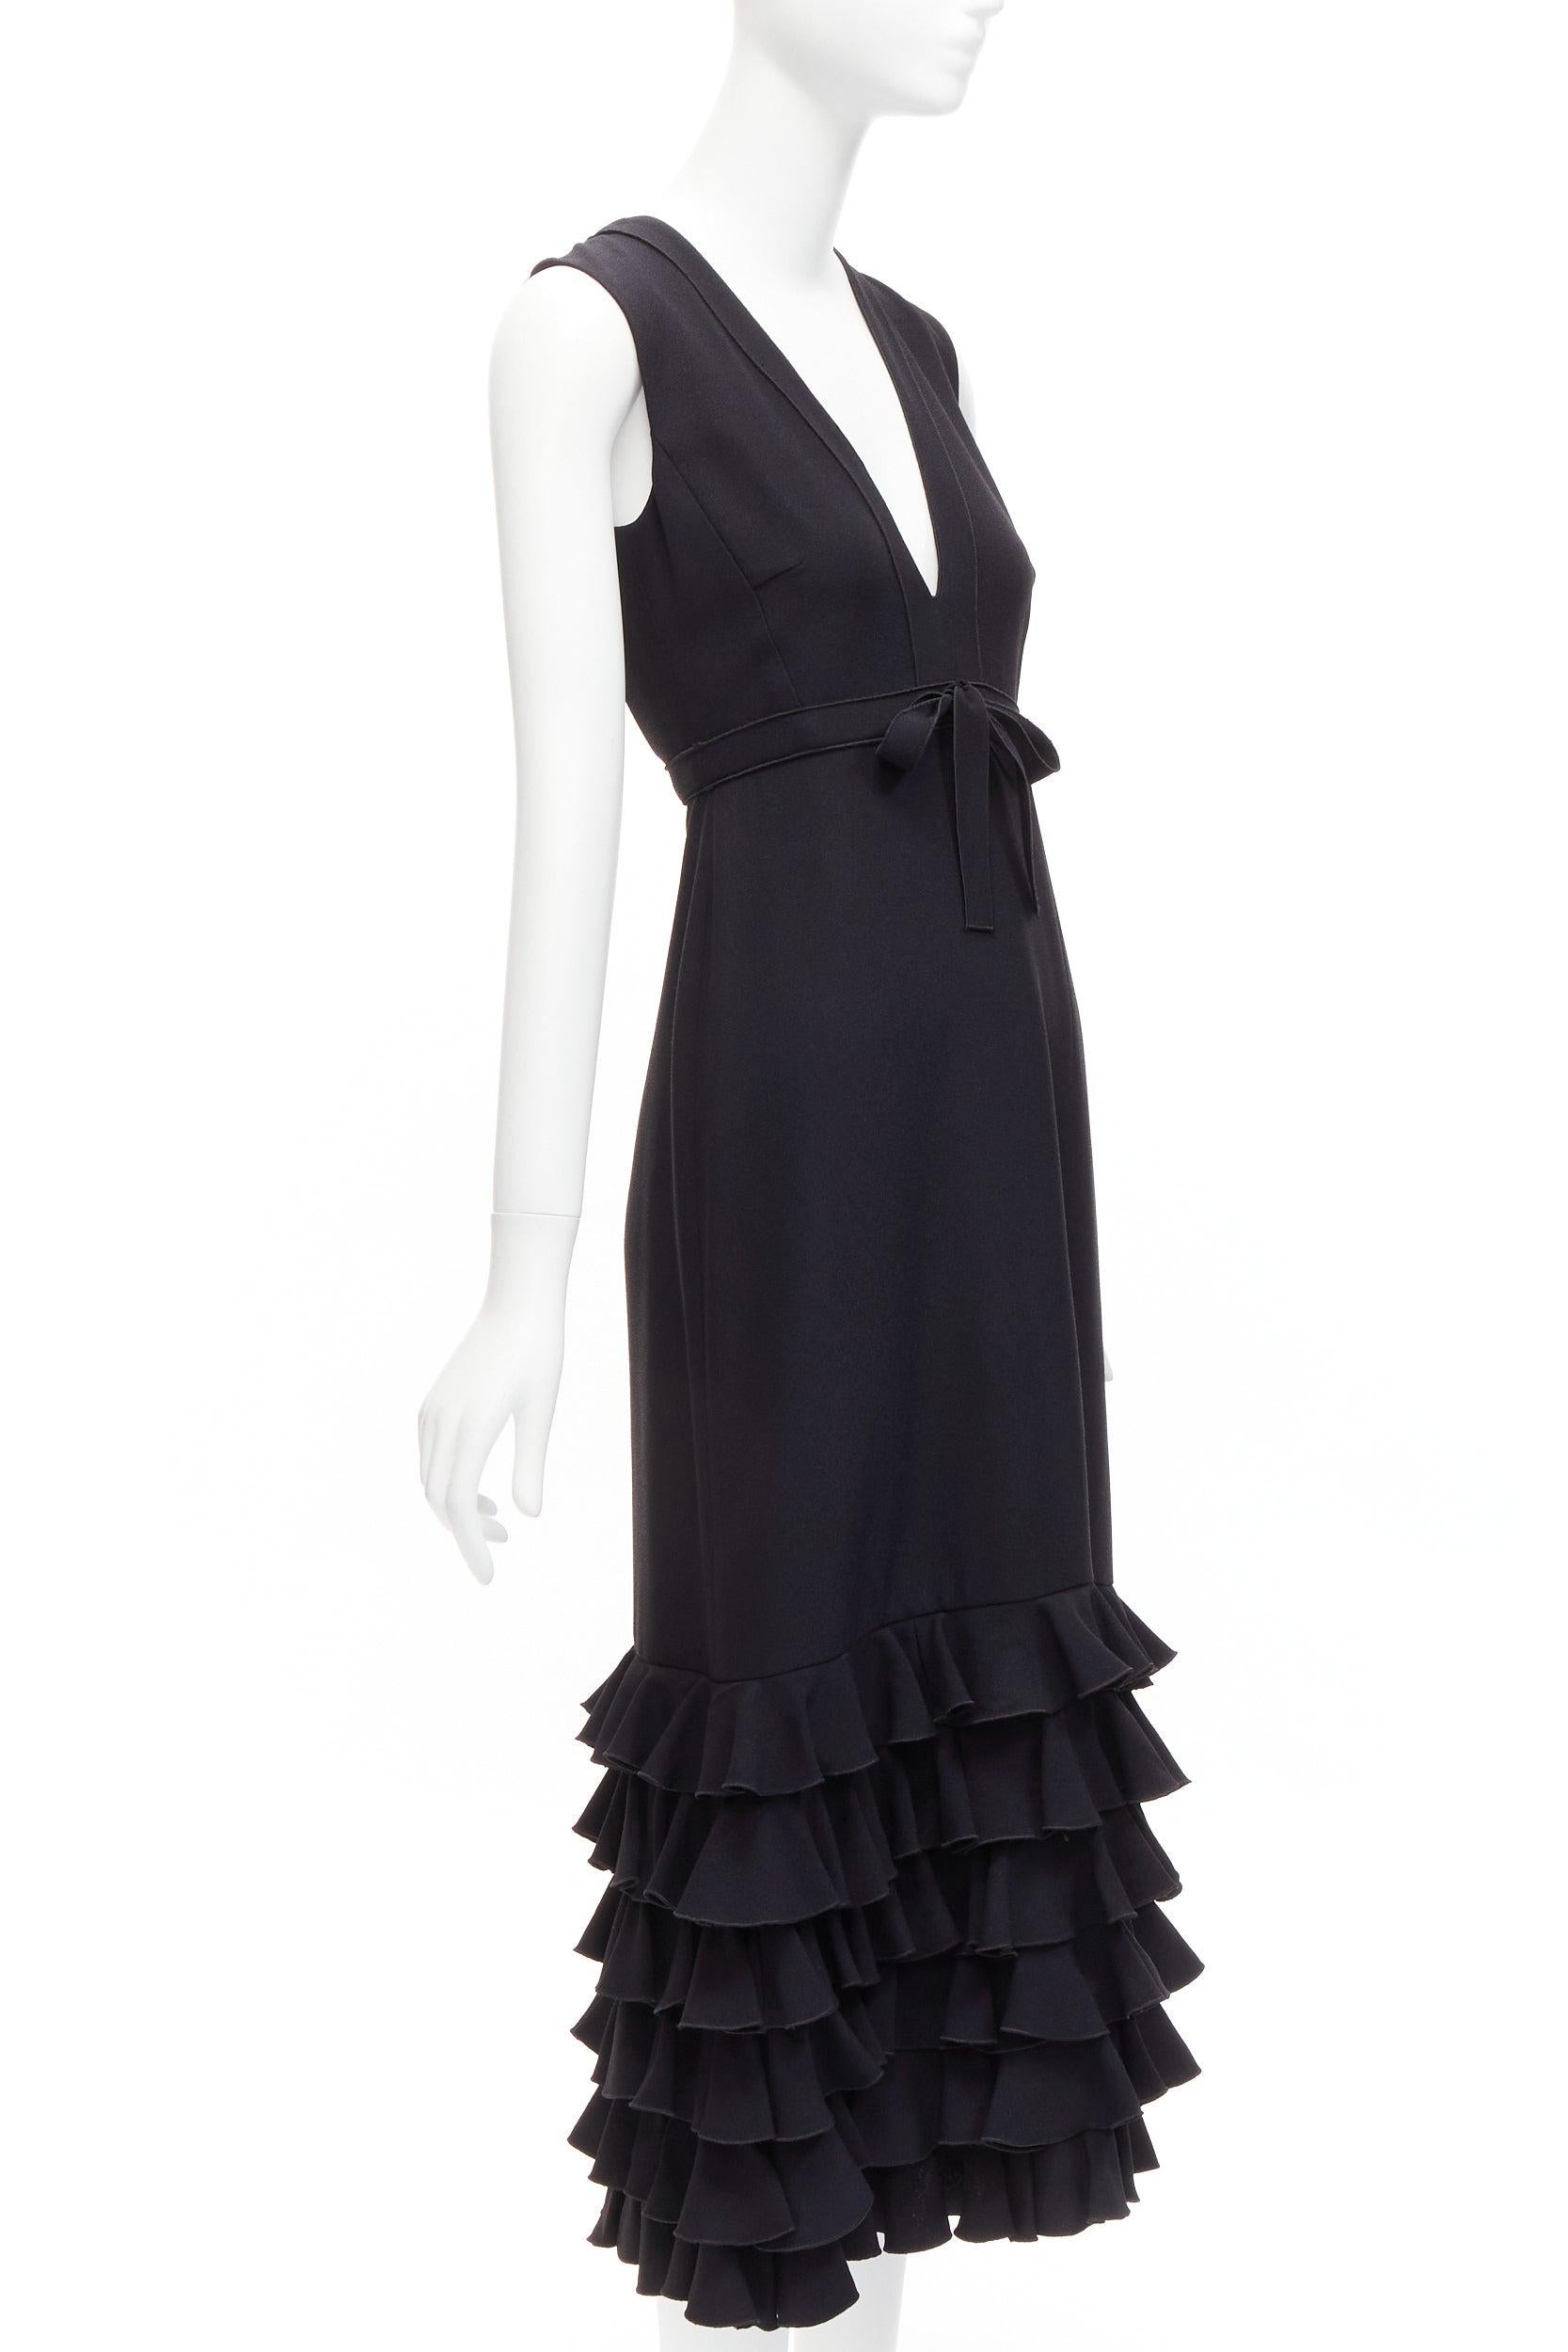 GIAMBATTISTA VALLI 2020 Runway ruffle plunge neck sleeveless cocktail dress IT38 In Excellent Condition For Sale In Hong Kong, NT